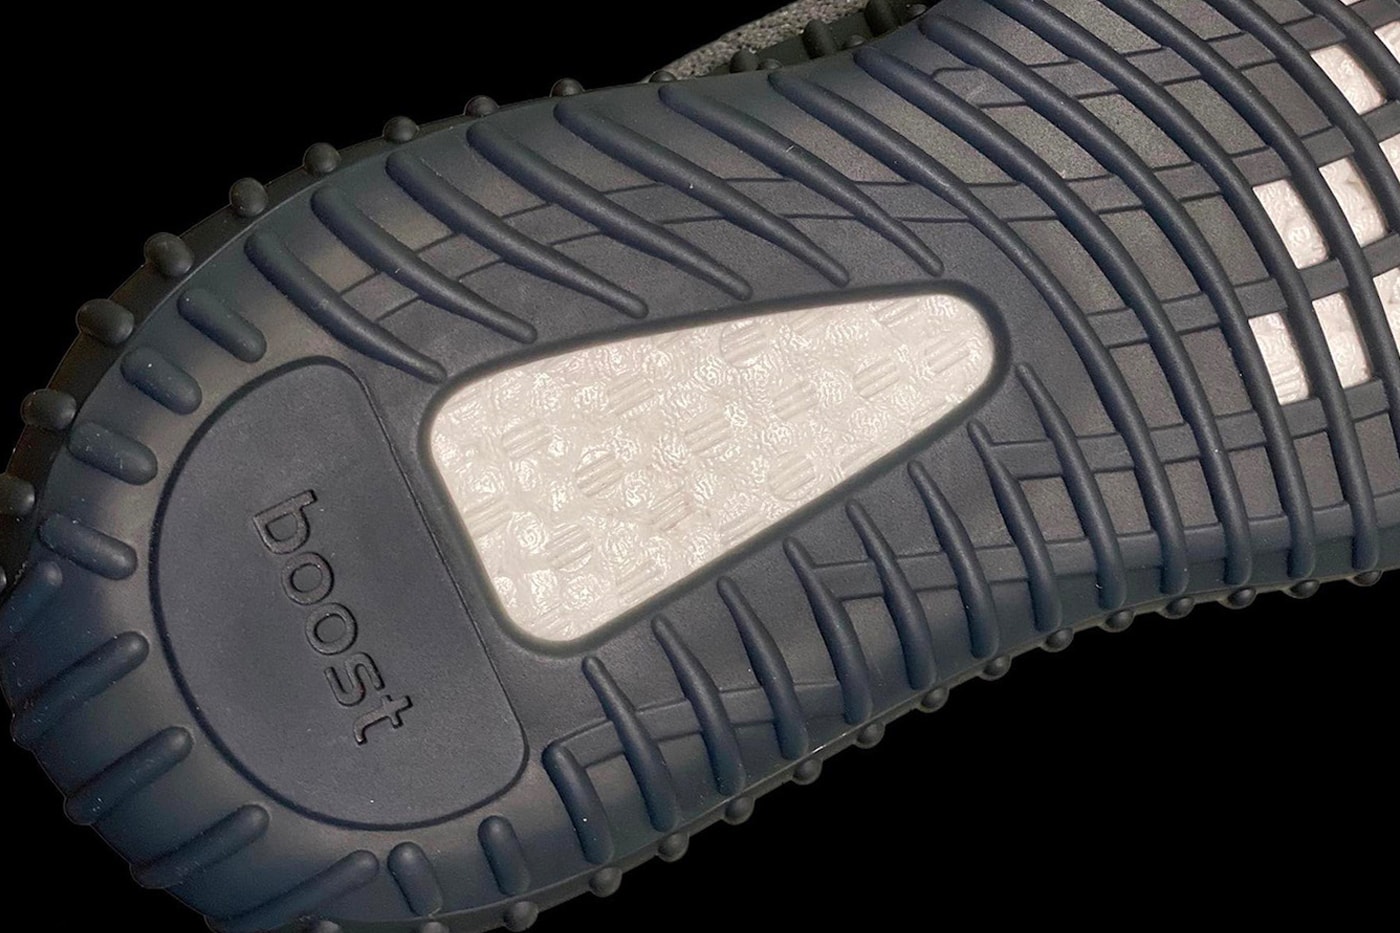 adidas YEEZY BOOST 350 V2 MX Grey First Look Release Info Date Buy Price 